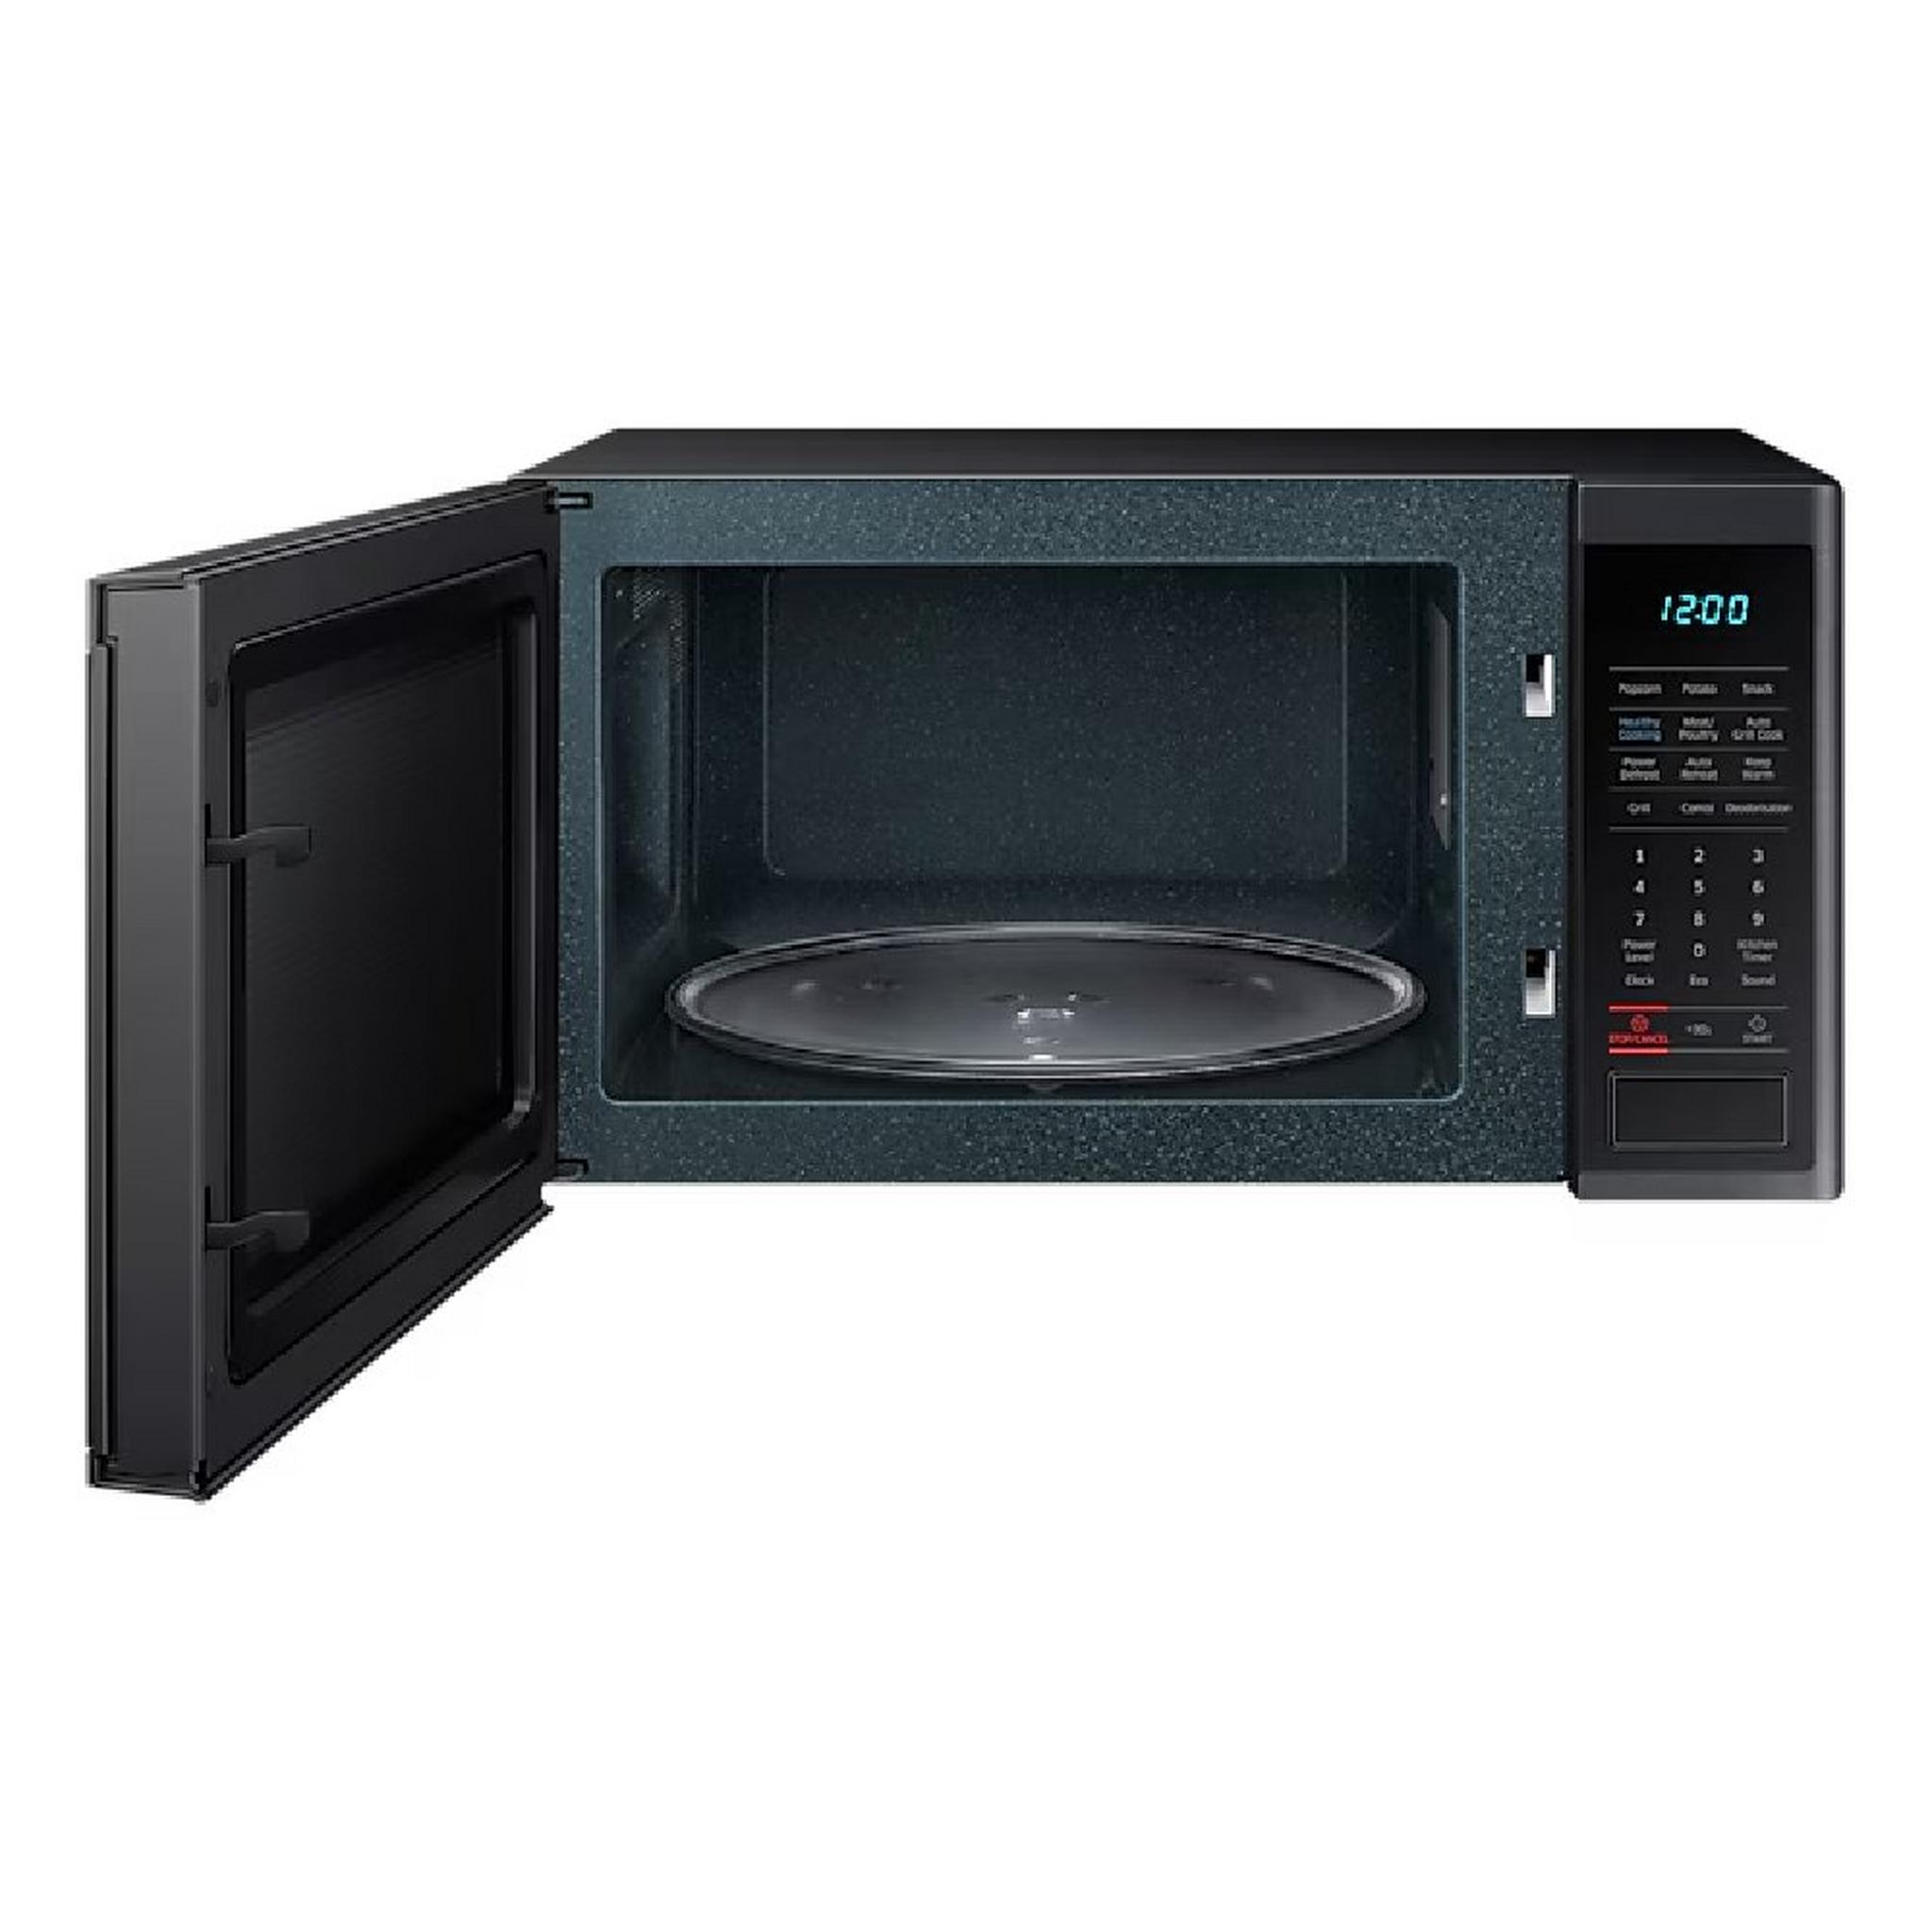 Samsung Microwave Oven Grill 900W, 32L, MG32J5133AG – Black